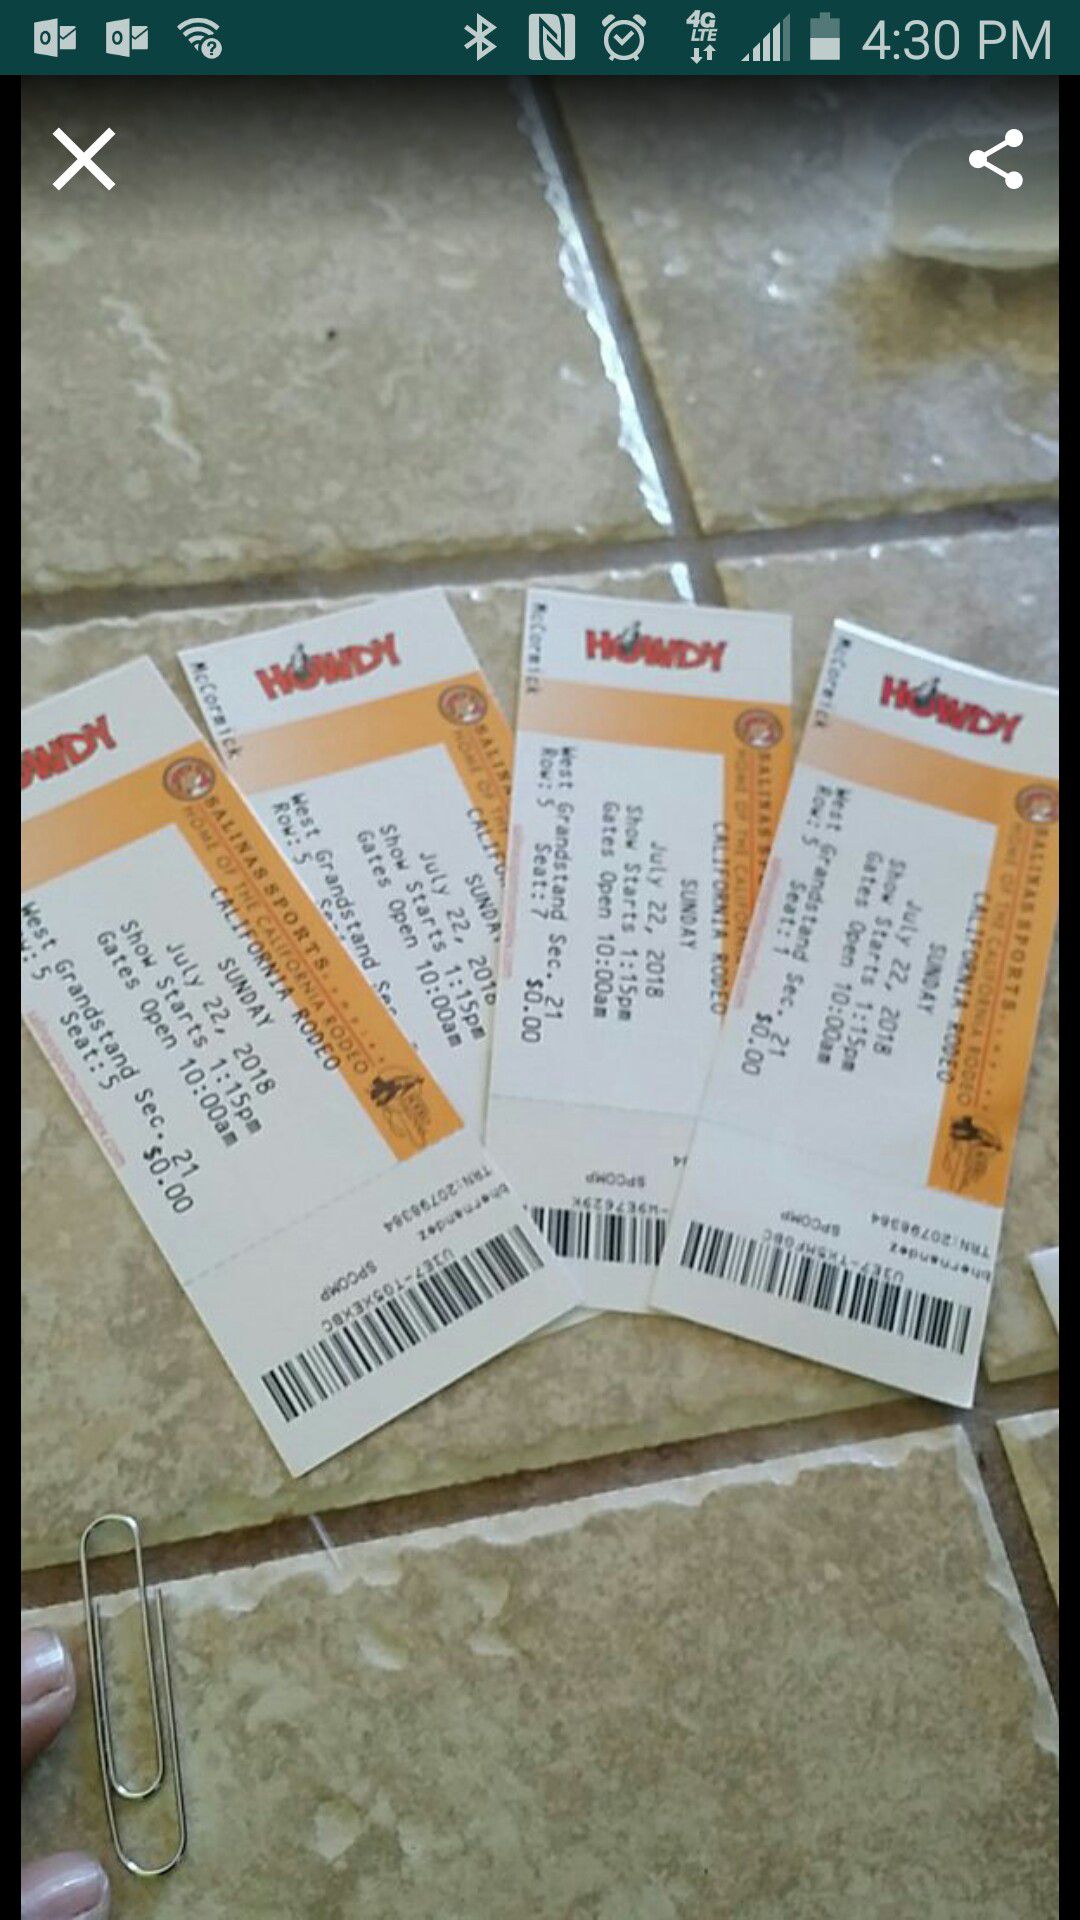 Rodeo tickets for 7/22